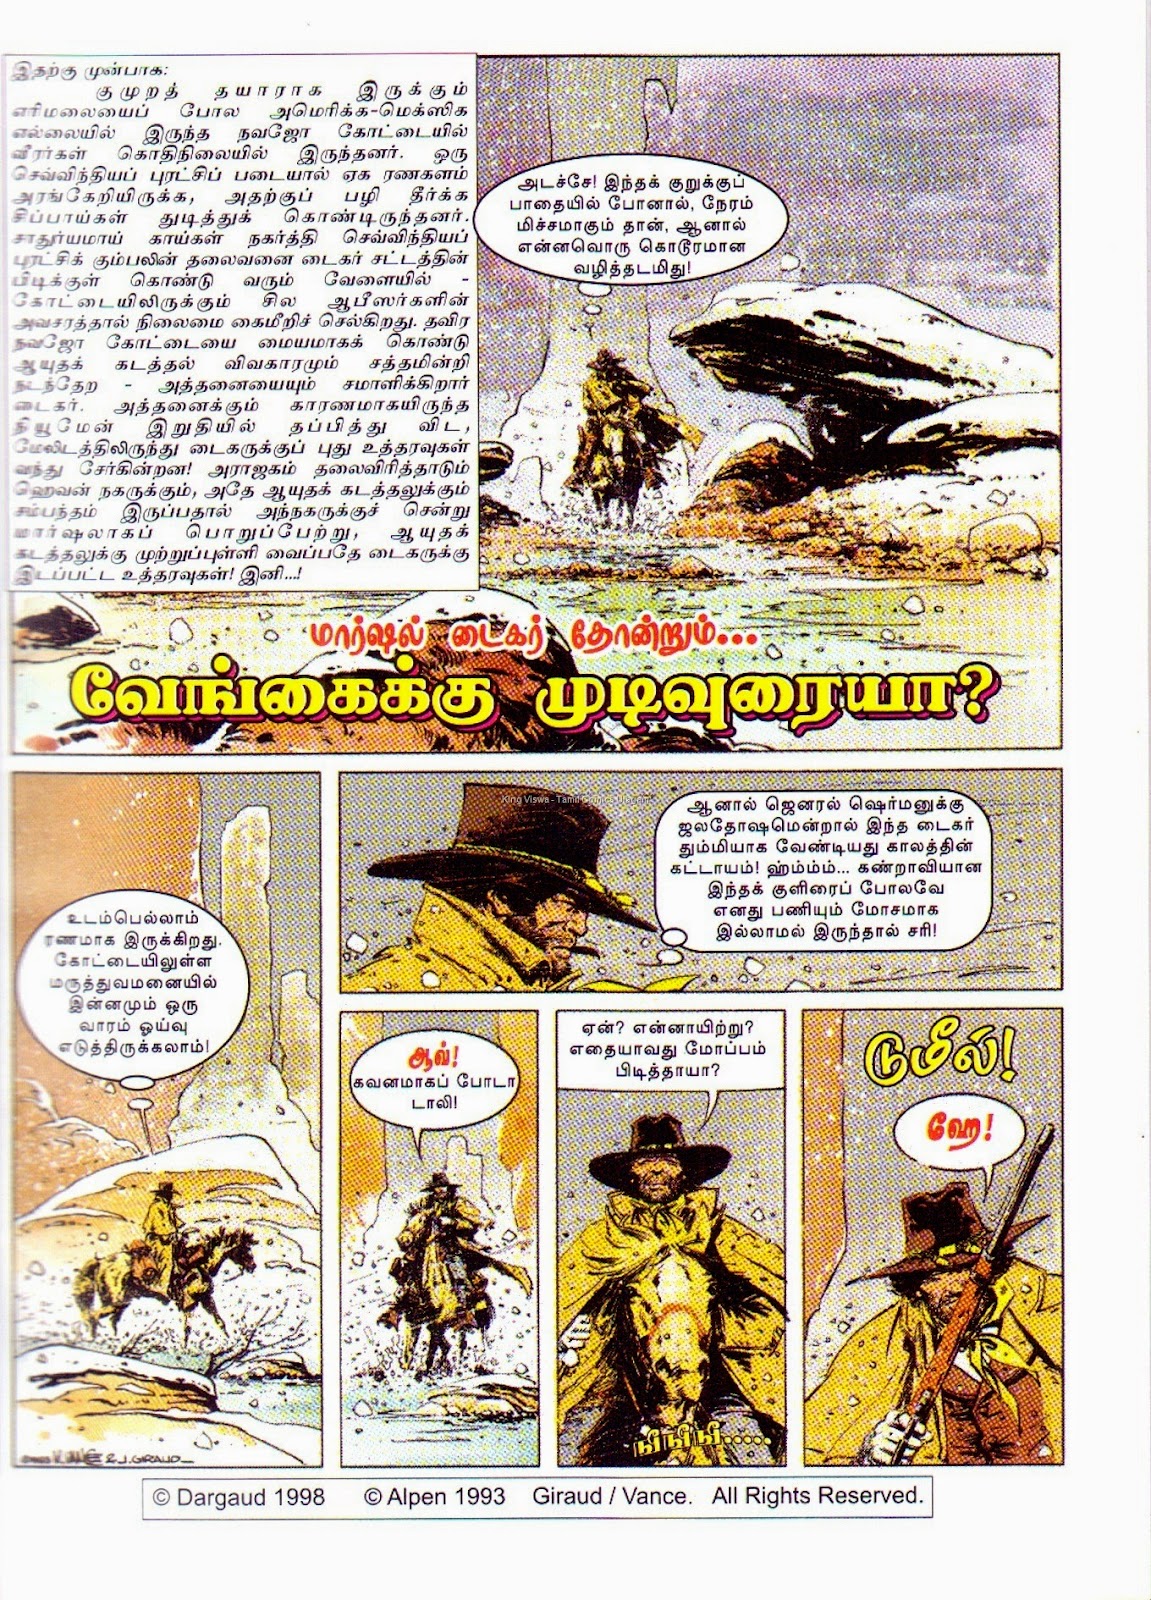 [Muthu%2520Comics%2520Issue%2520No%2520338%2520Dated%2520March%25202015%2520Captain%2520Tiger%2520Vengaikke%2520Mudivuraiyaa%2520Page%2520No%2520005%2520Story%2520Page%255B5%255D.jpg]